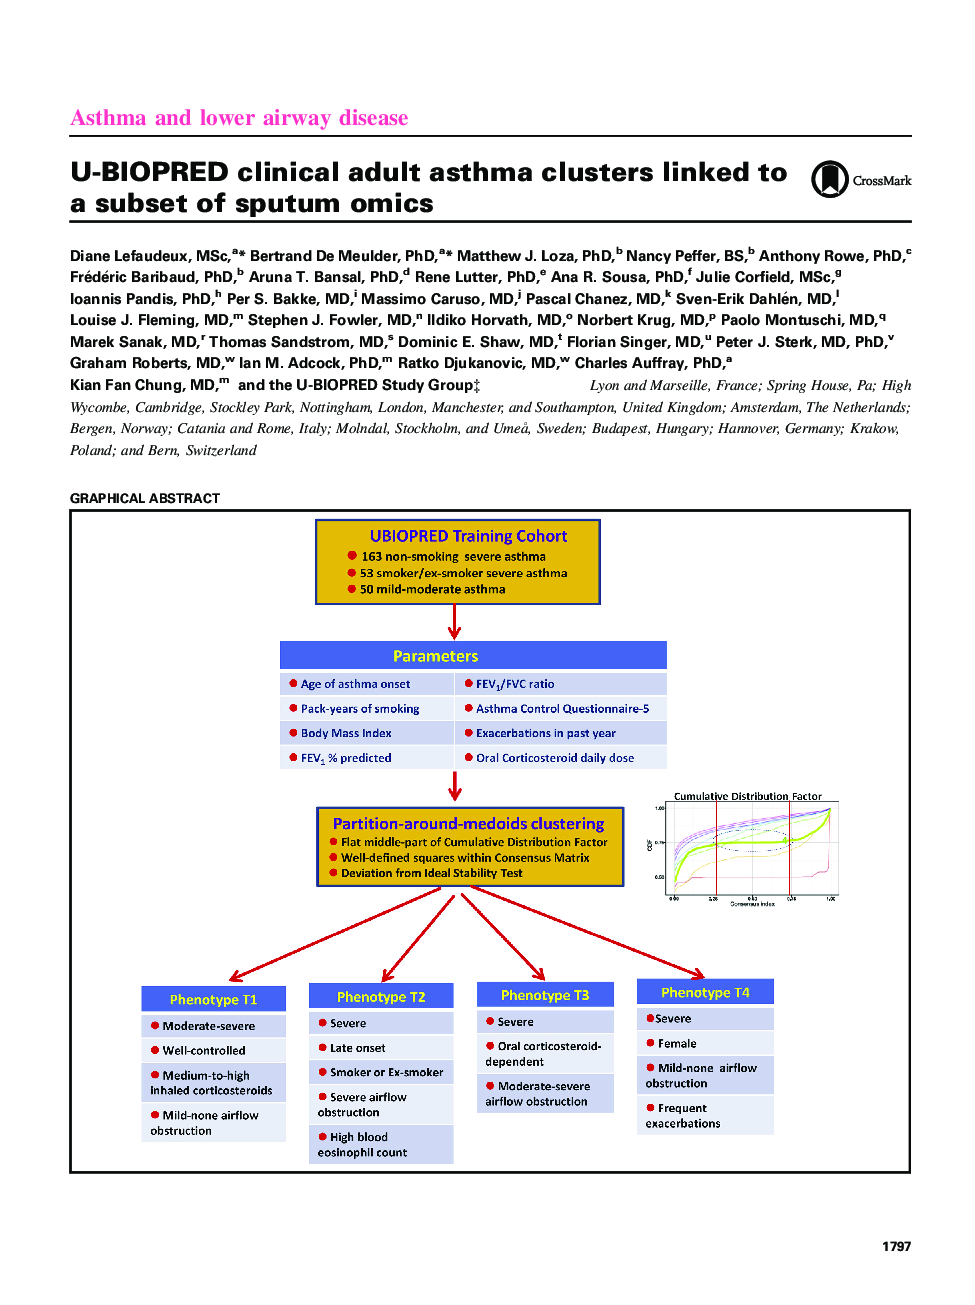 U-BIOPRED clinical adult asthma clusters linked to a subset of sputum omics